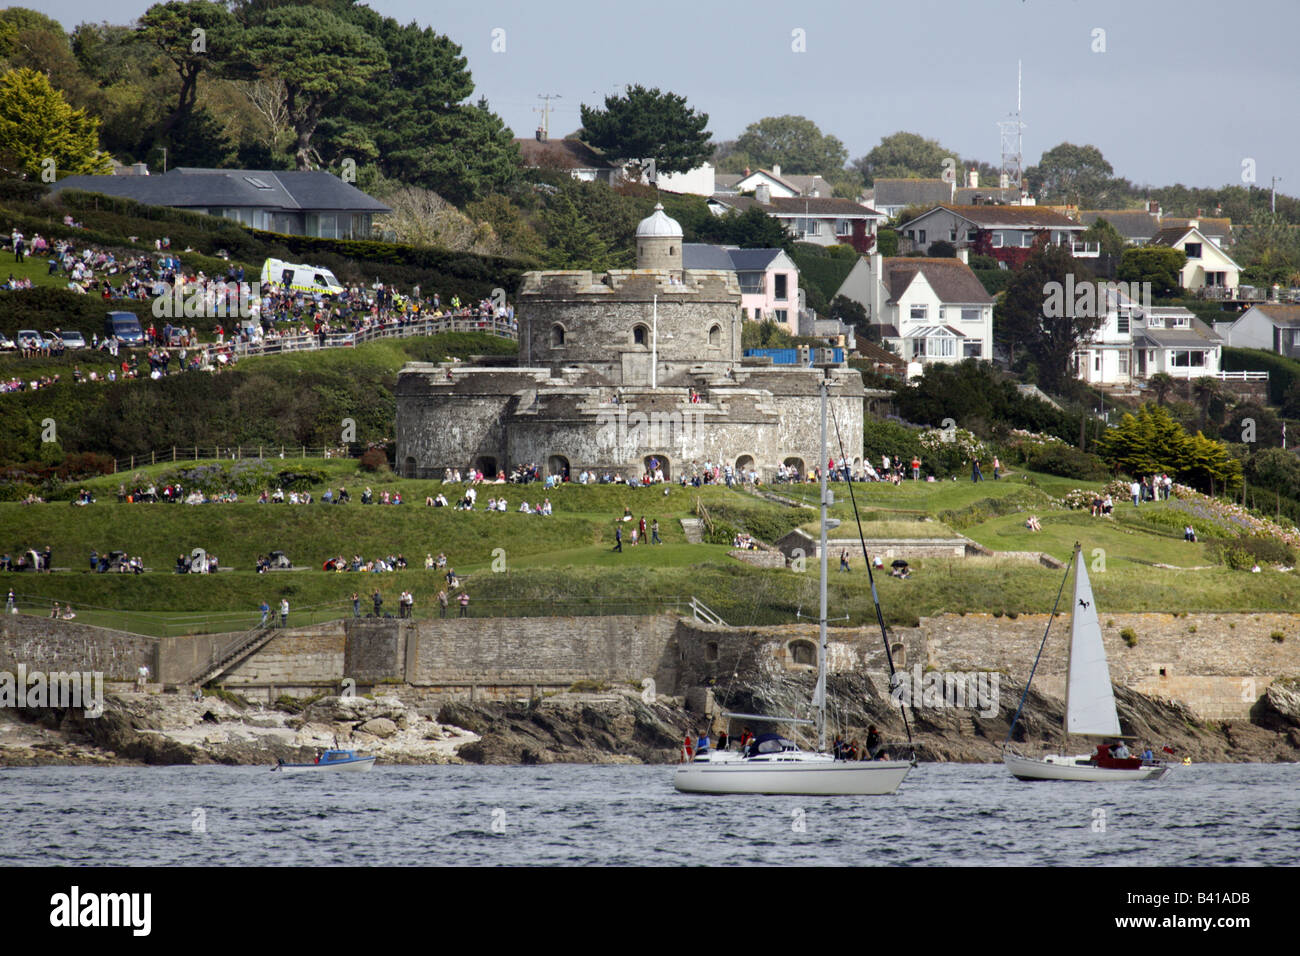 St Mawes Castle Spectators watching Tall Ships Parade of Sail from Falmouth September 2008 Stock Photo